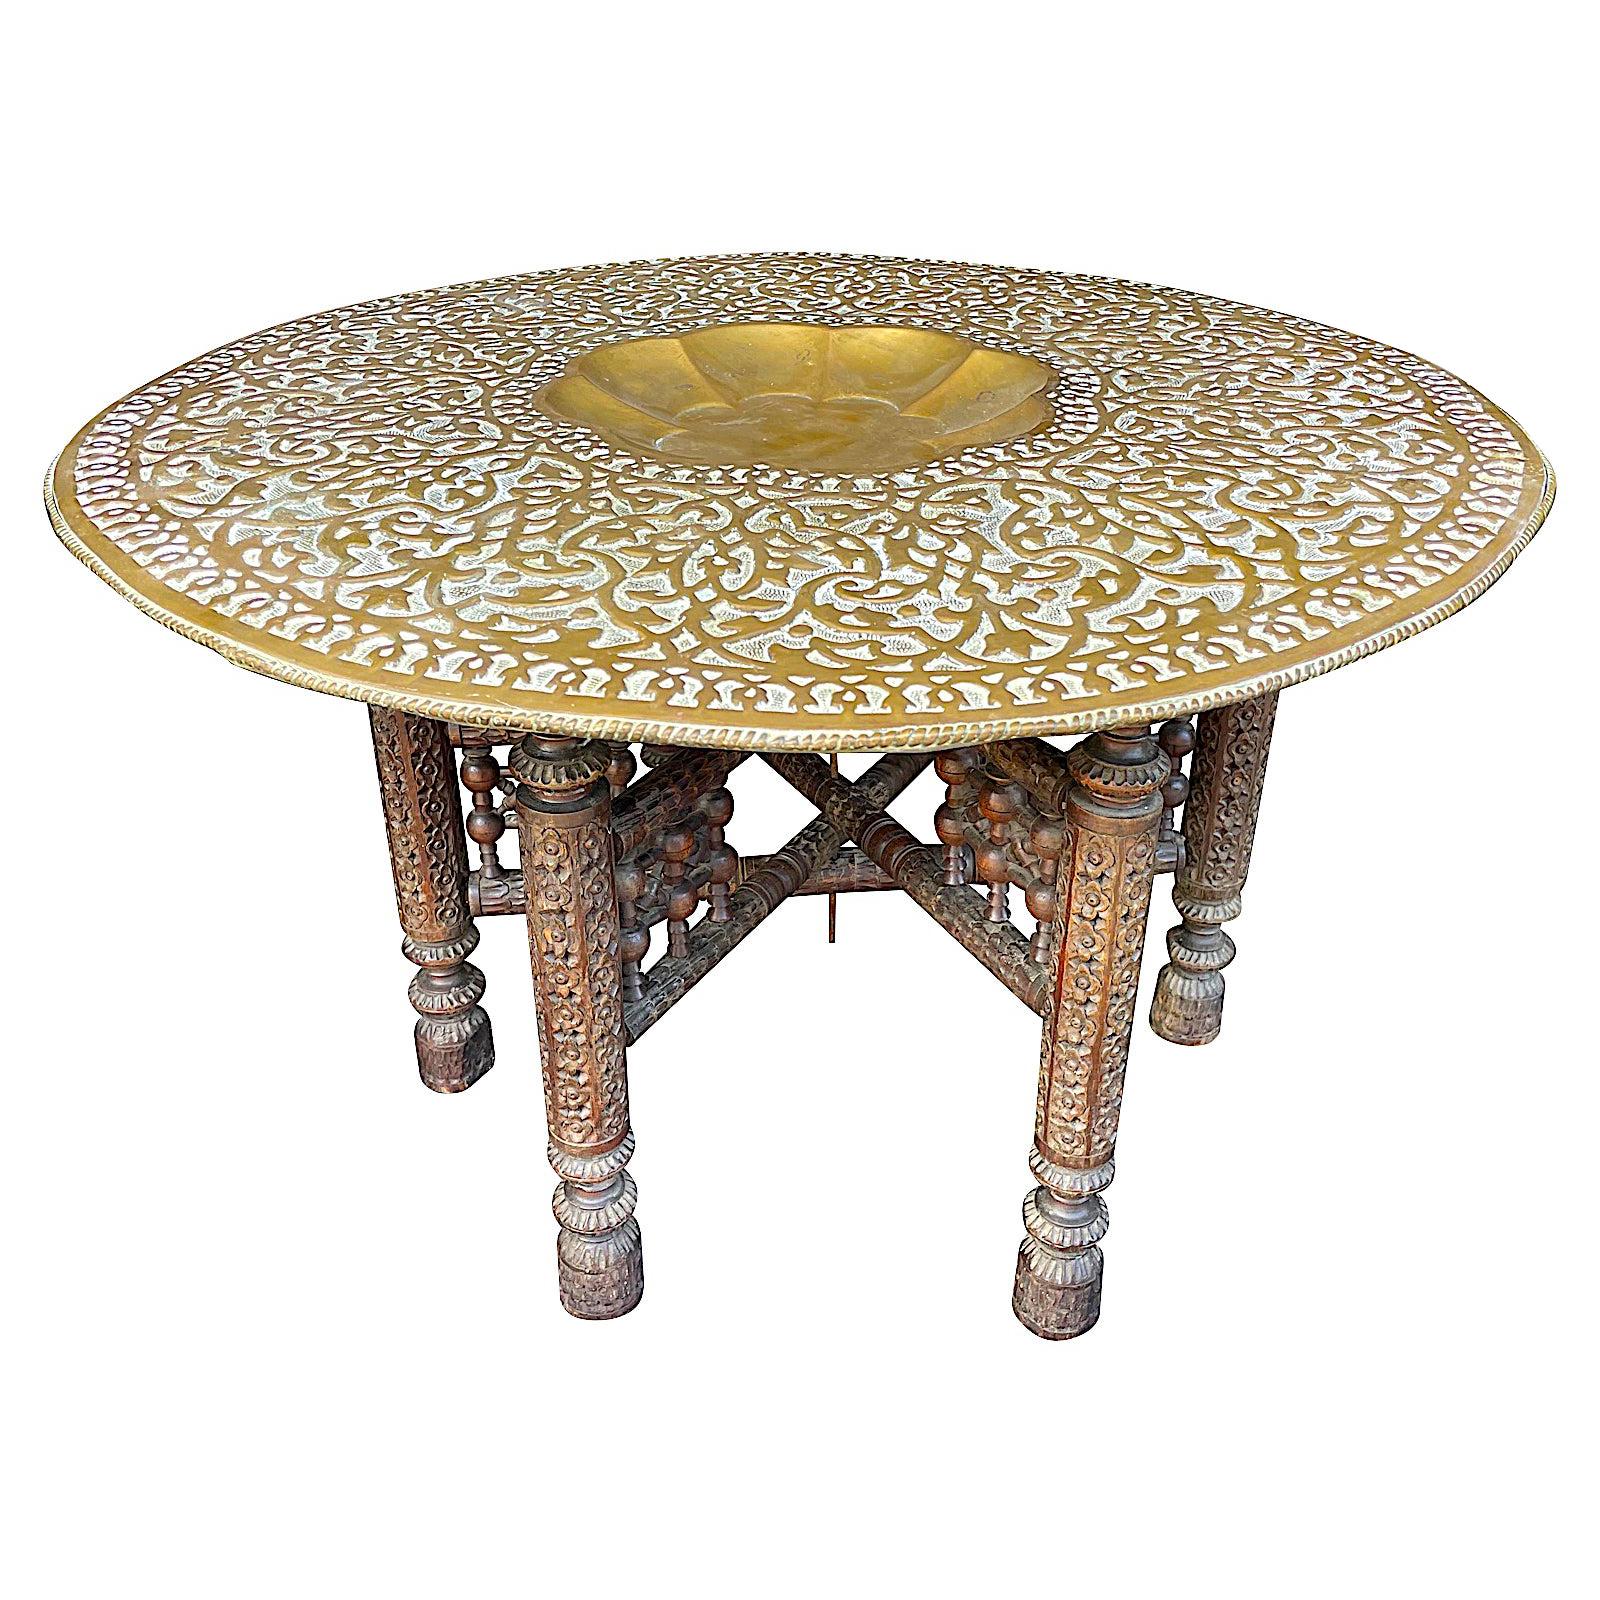 1920s Moroccan Carved Wooden Folding Table with Beautiful Hammered Brass Top